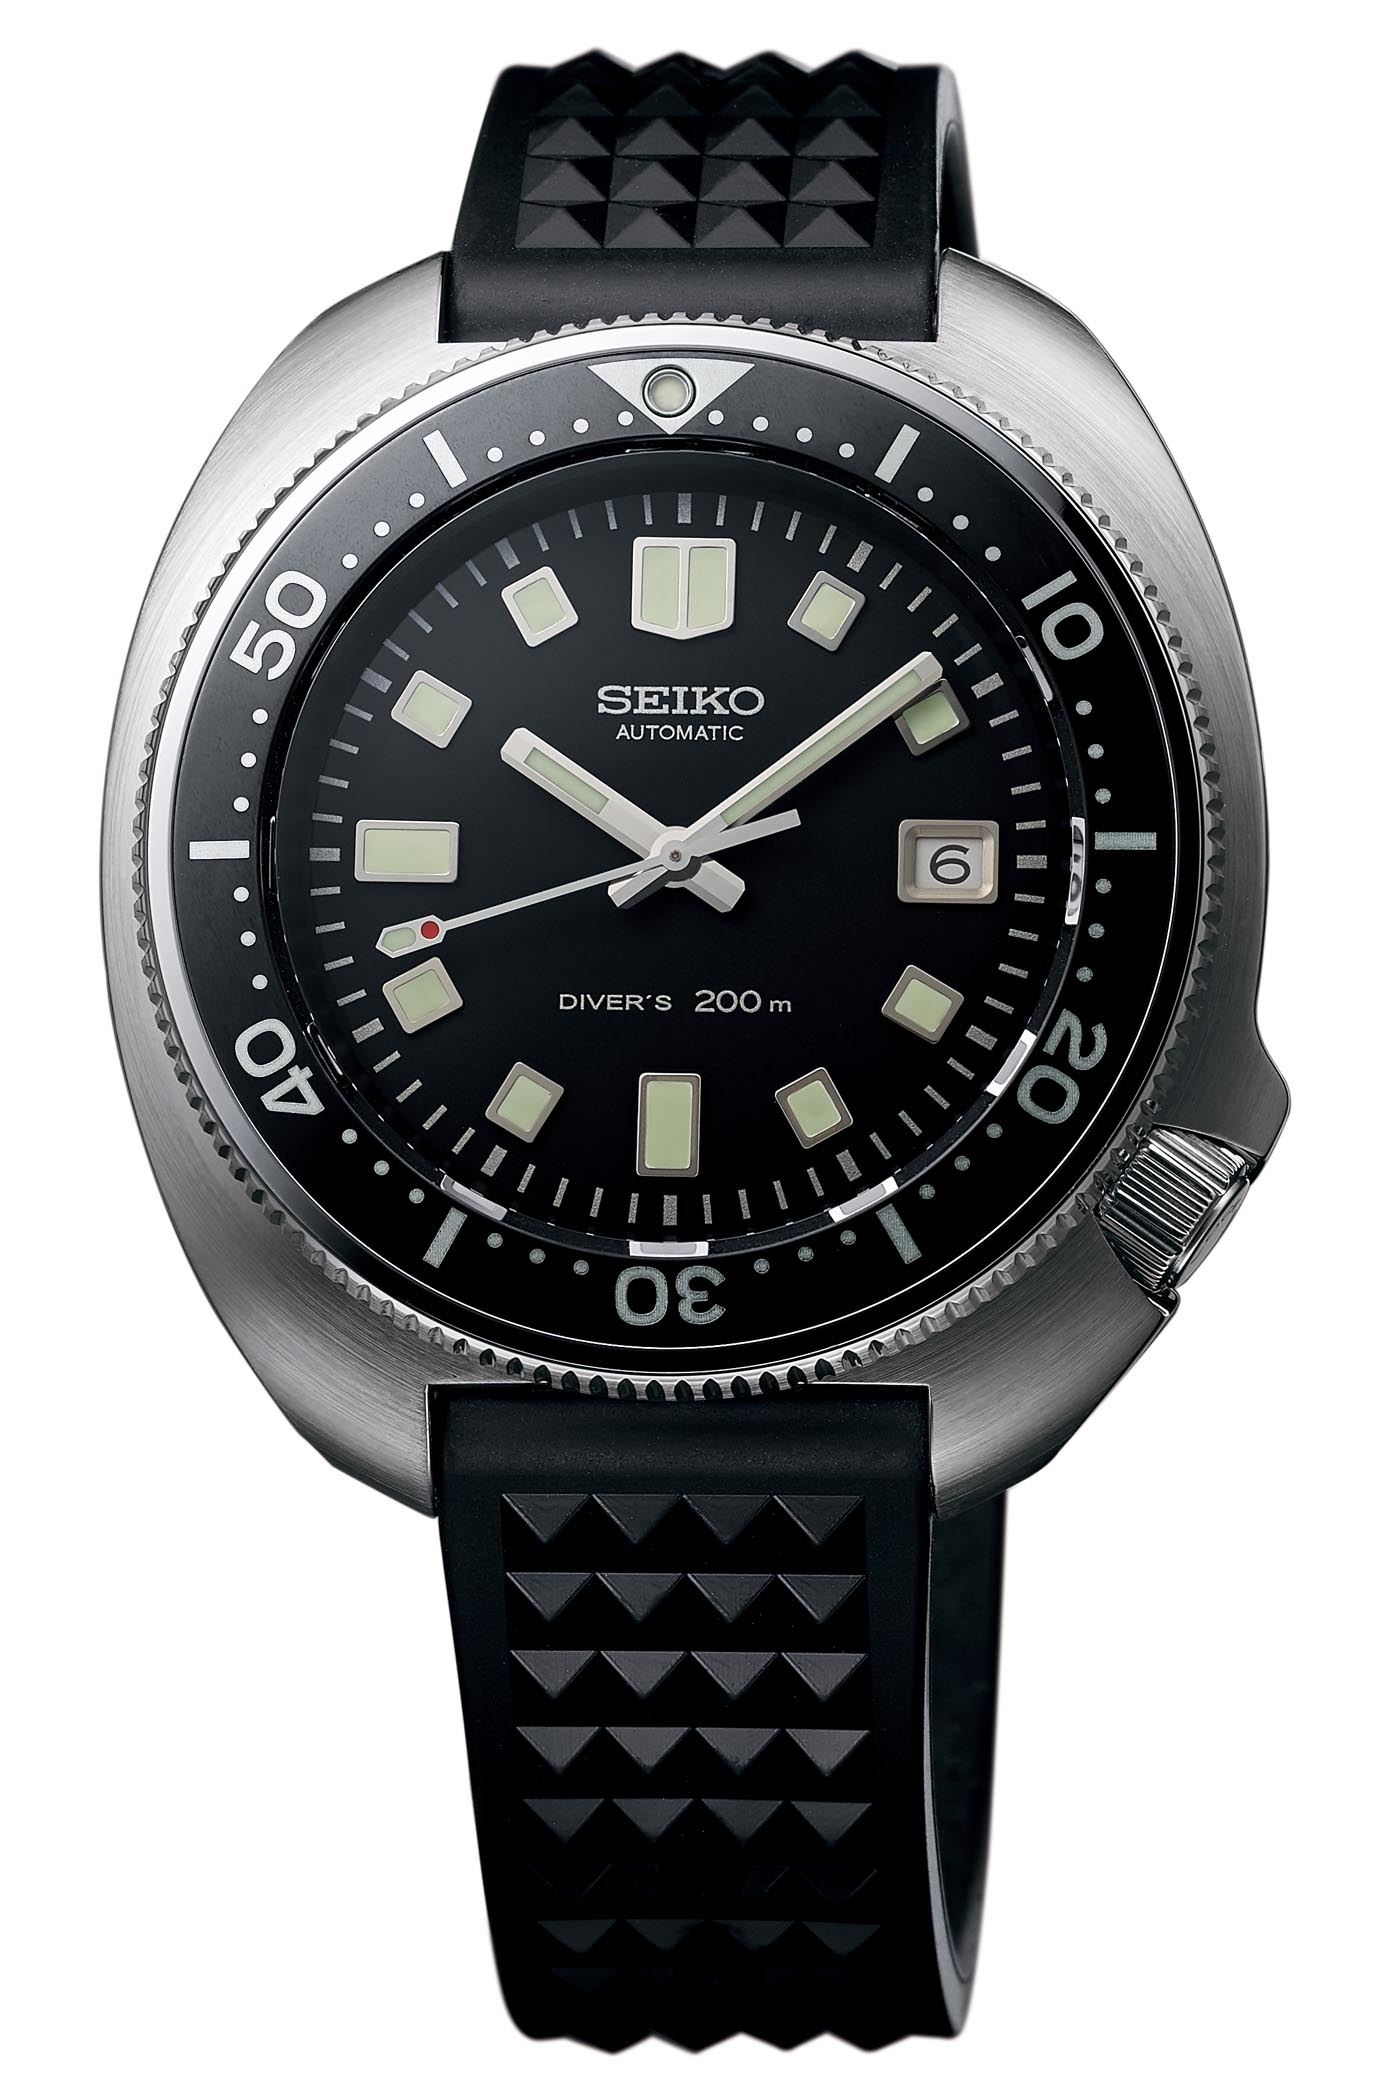 Baselworld 2019: Seiko 1970 Diver's Re-Creation Limited Edition SLA033 Watch